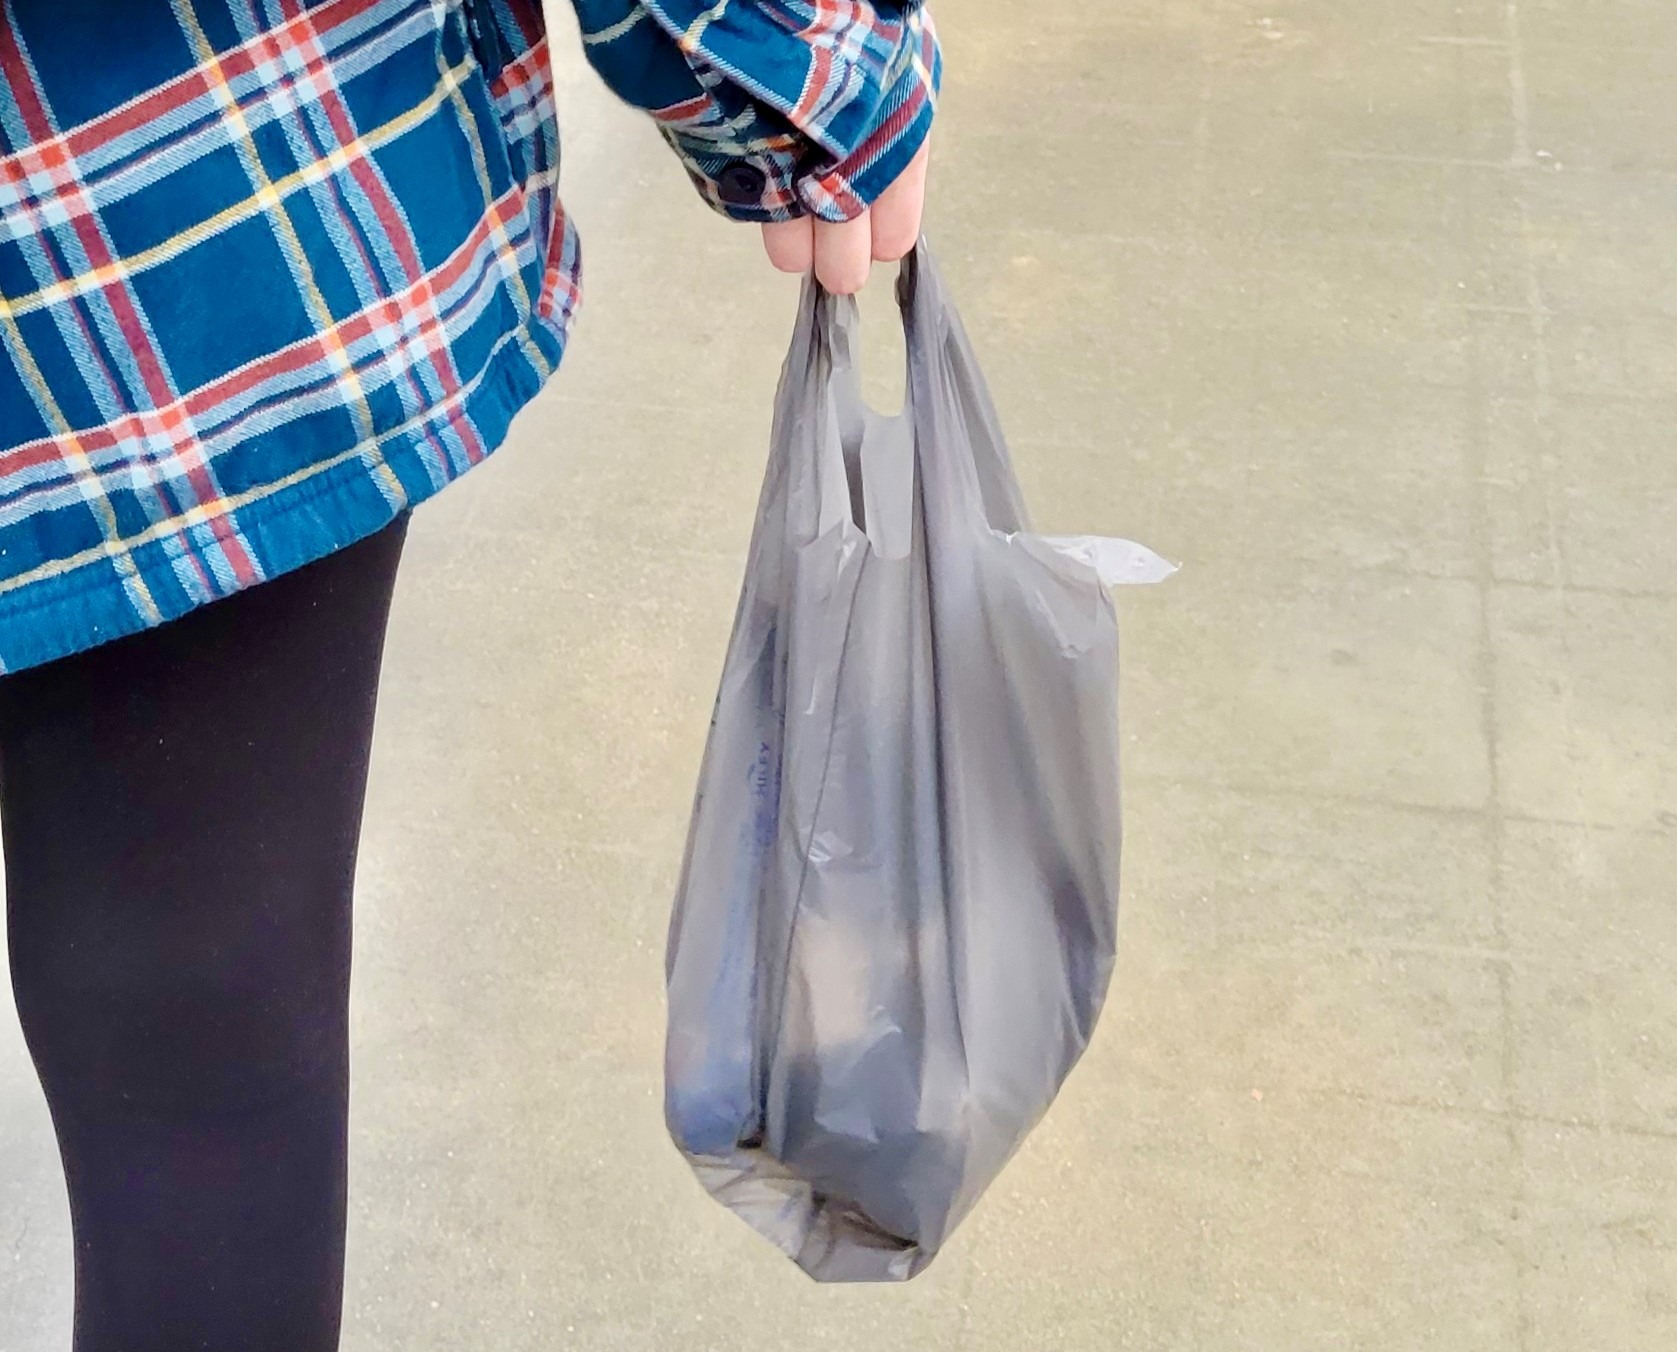 Five cent plastic bag tax in City of Fredericksburg will go into effect starting Jan. 1, 2022